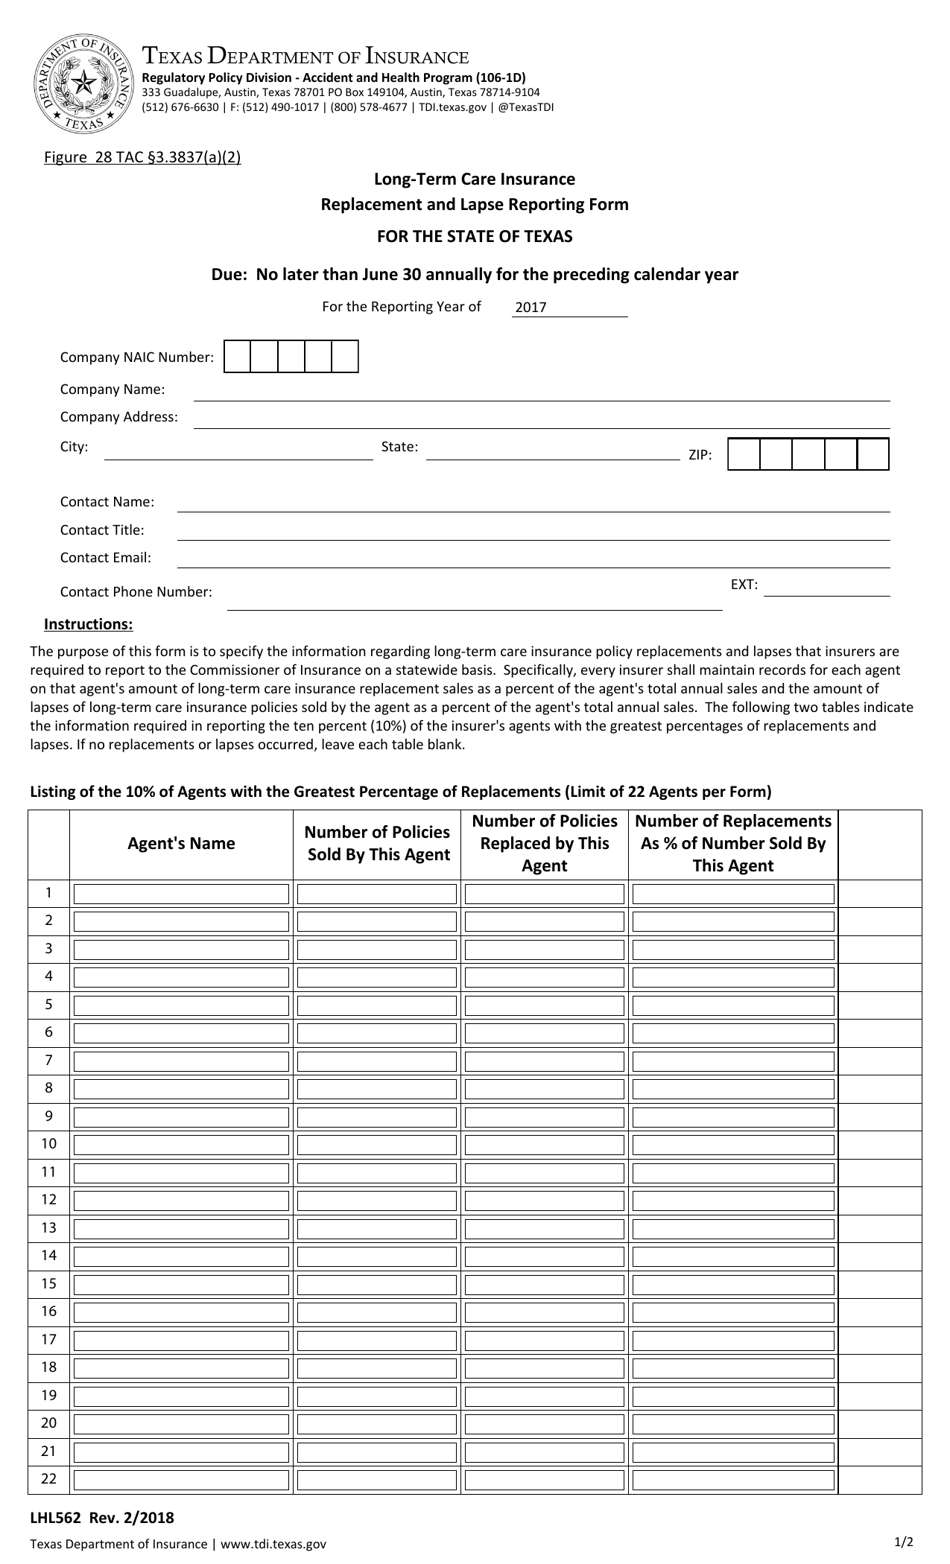 Form LHL562 Long-Term Care Insurance Replacement and Lapse Reporting Form - Texas, Page 1